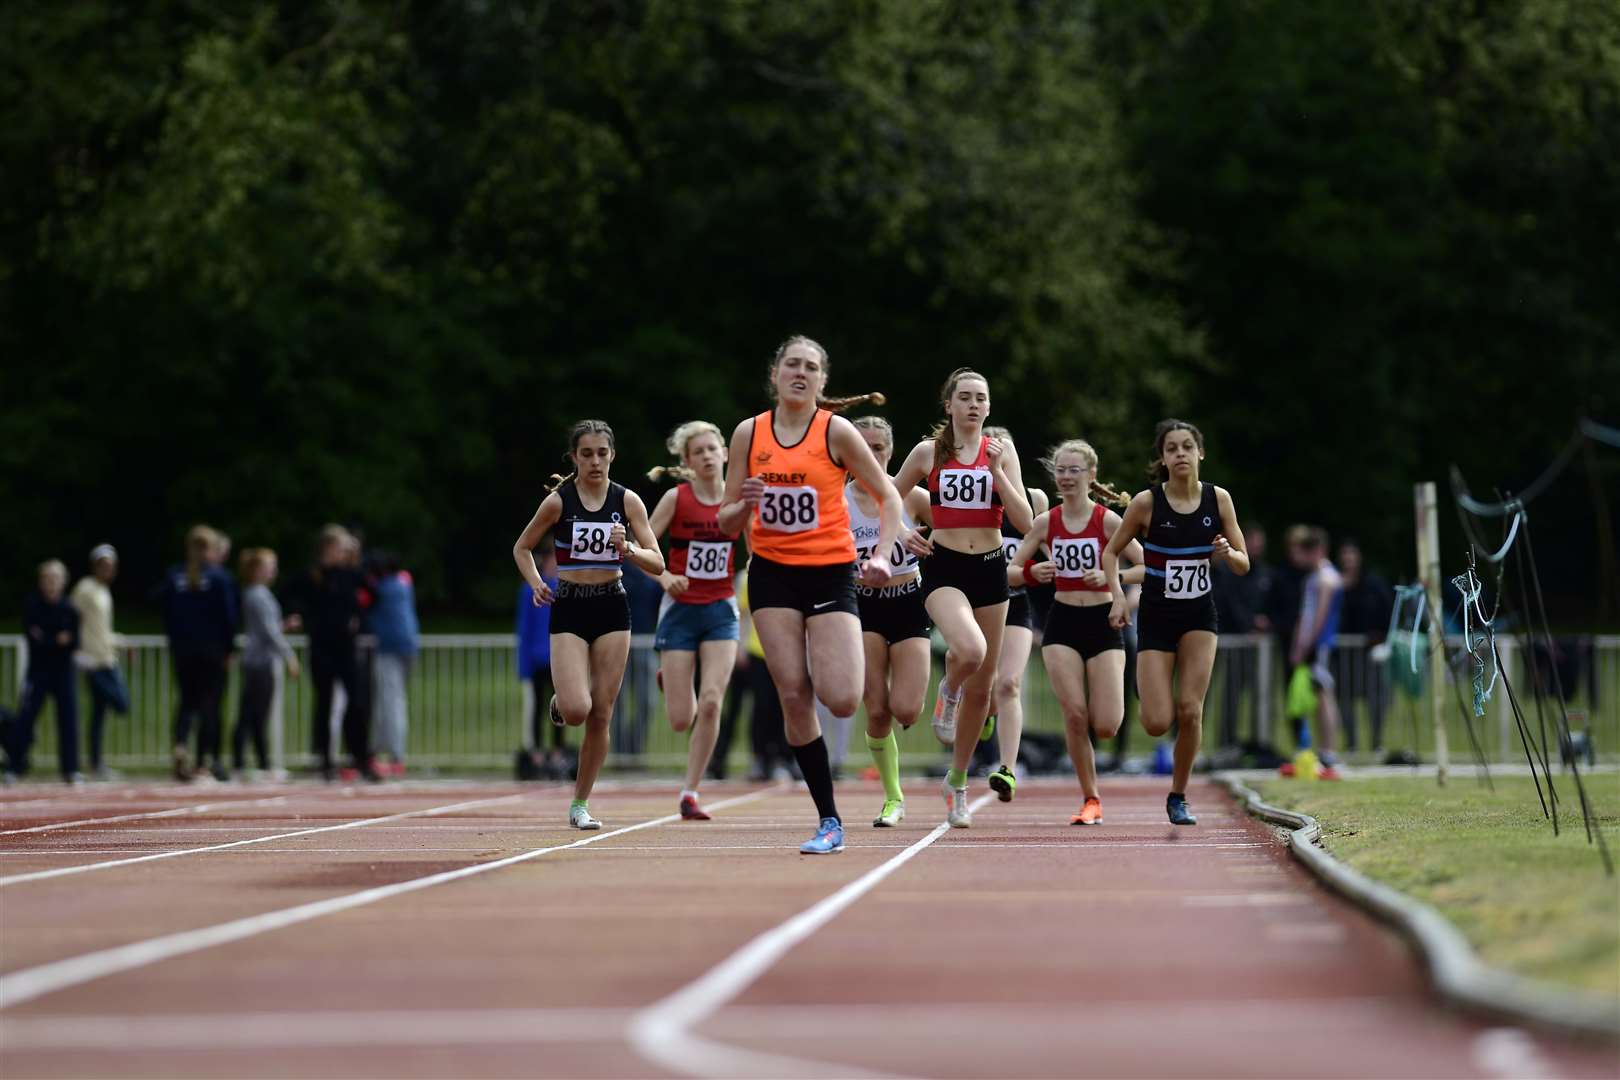 Chiani-Rae Garland (Bexley AC) leads the field in the 800m u17 race Picture: Barry Goodwin